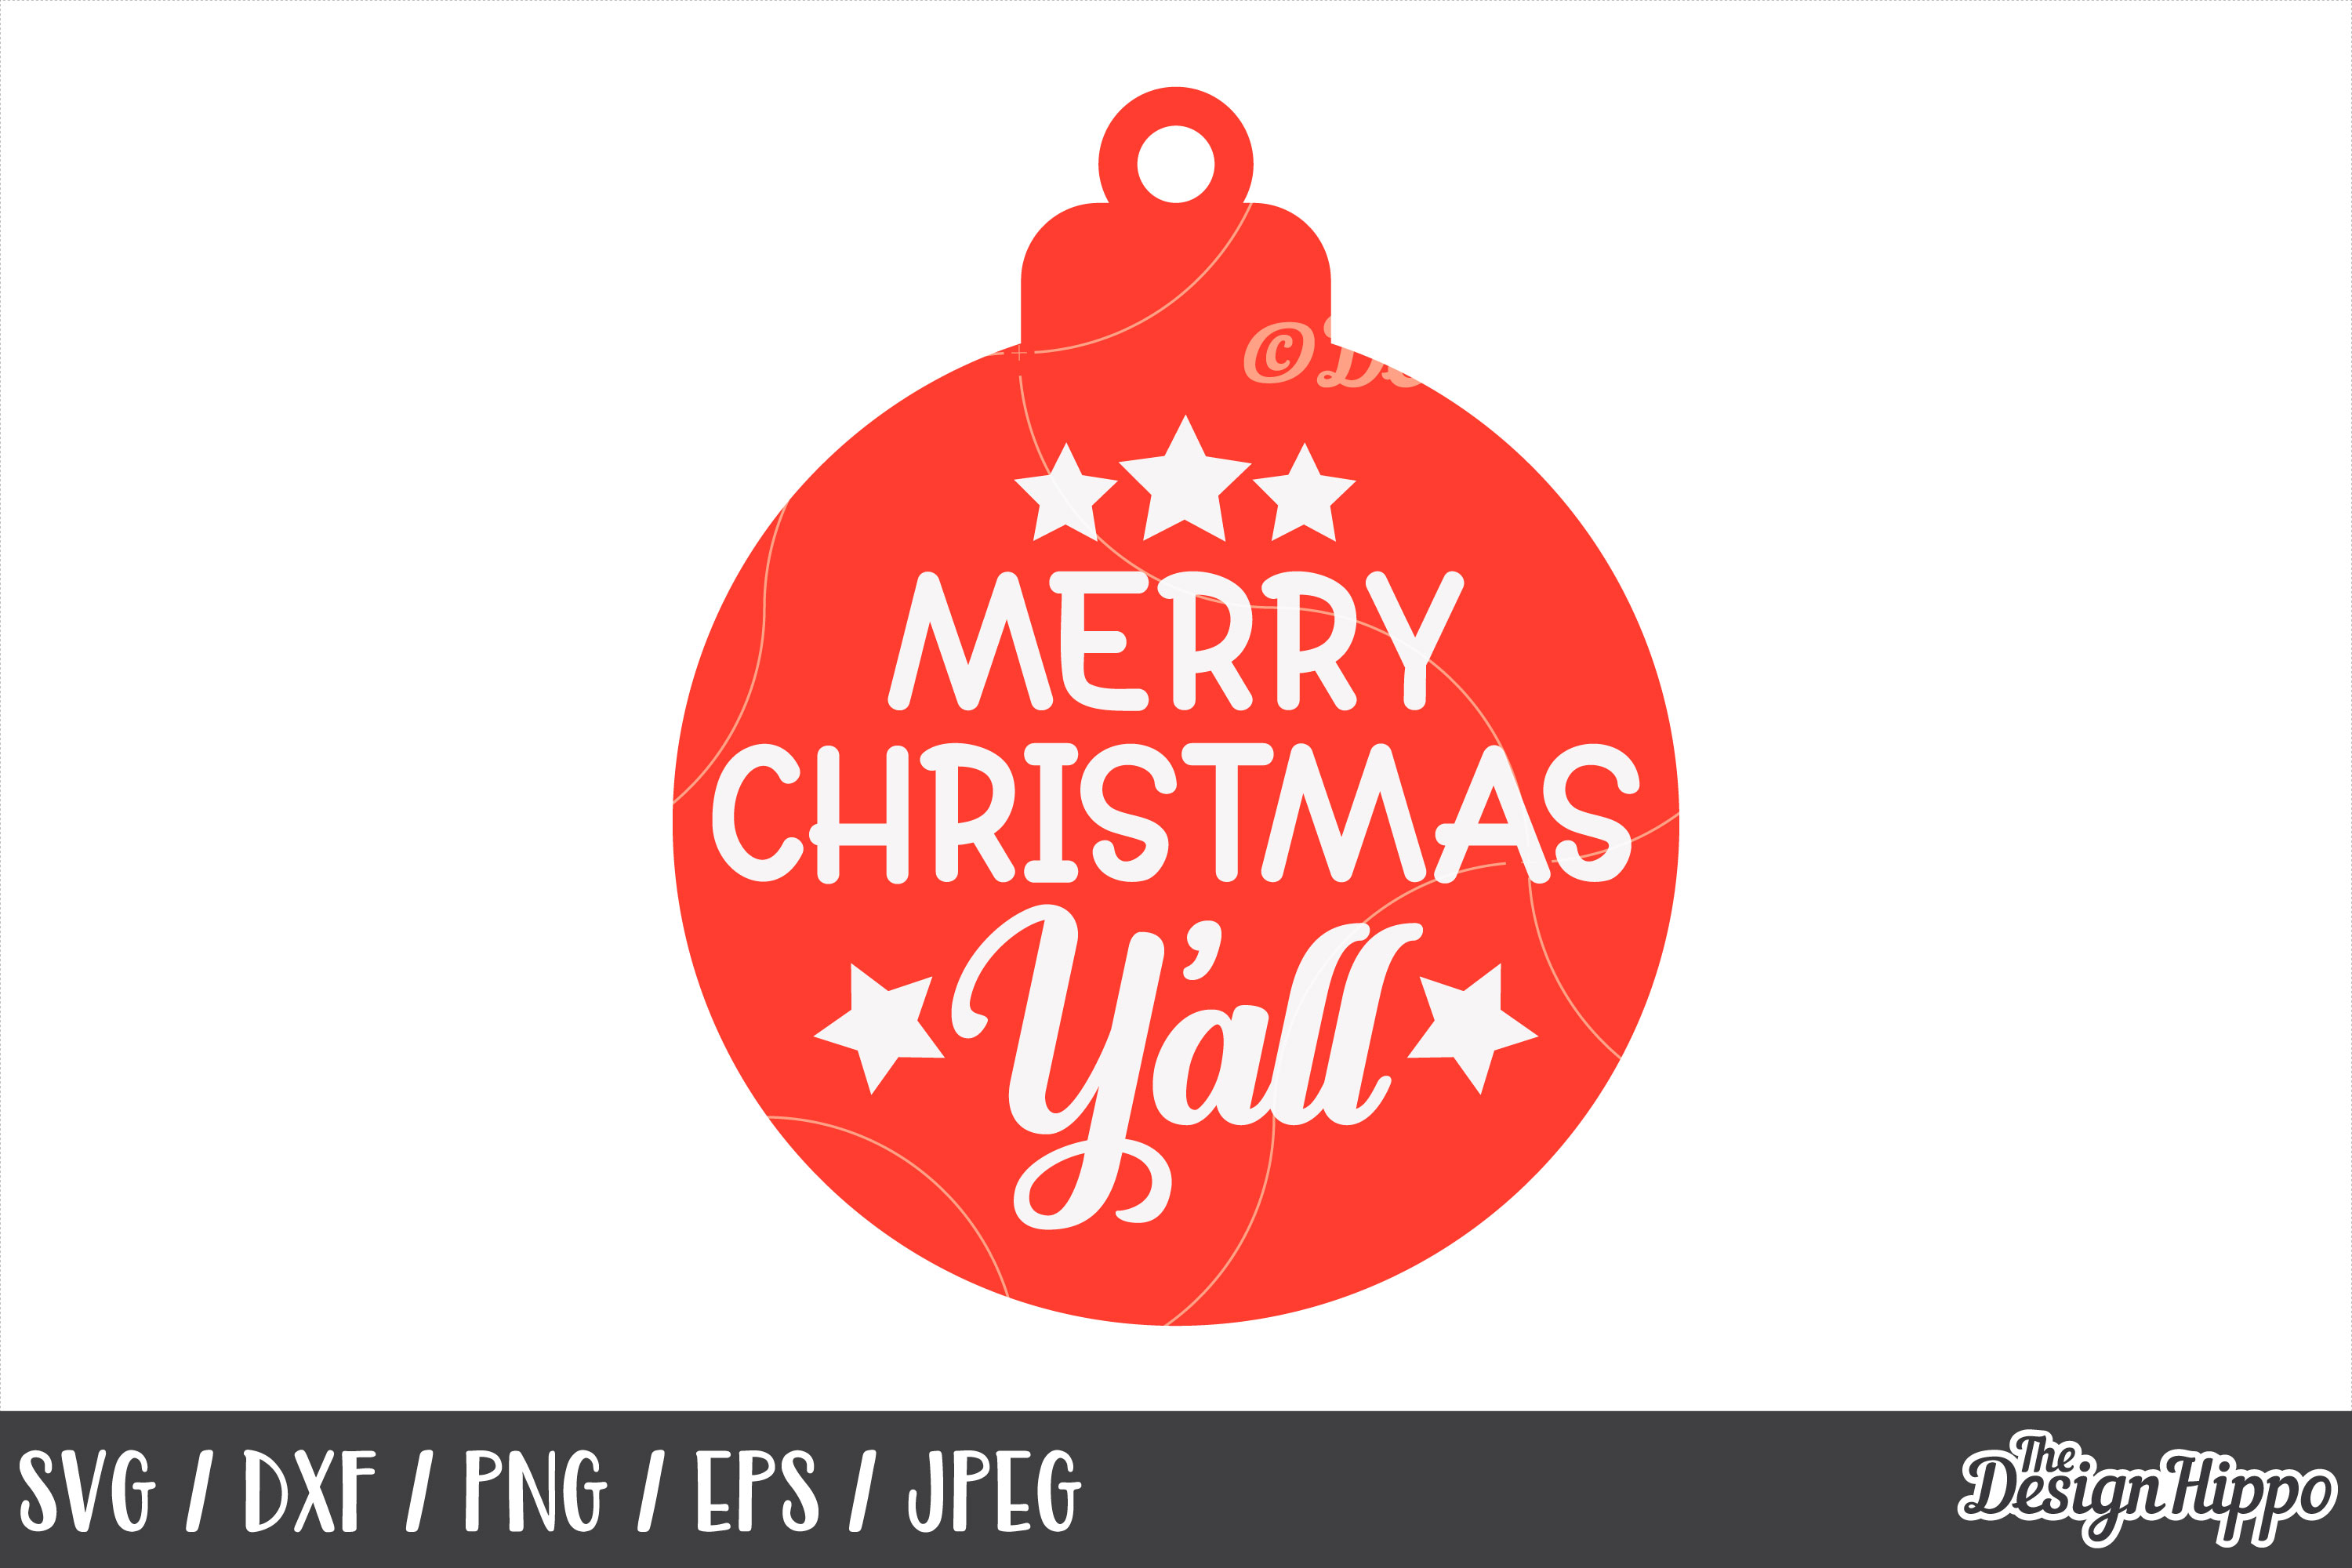 Download Merry Christmas Y'all SVG, Christmas Bauble, PNG, DXF, Files